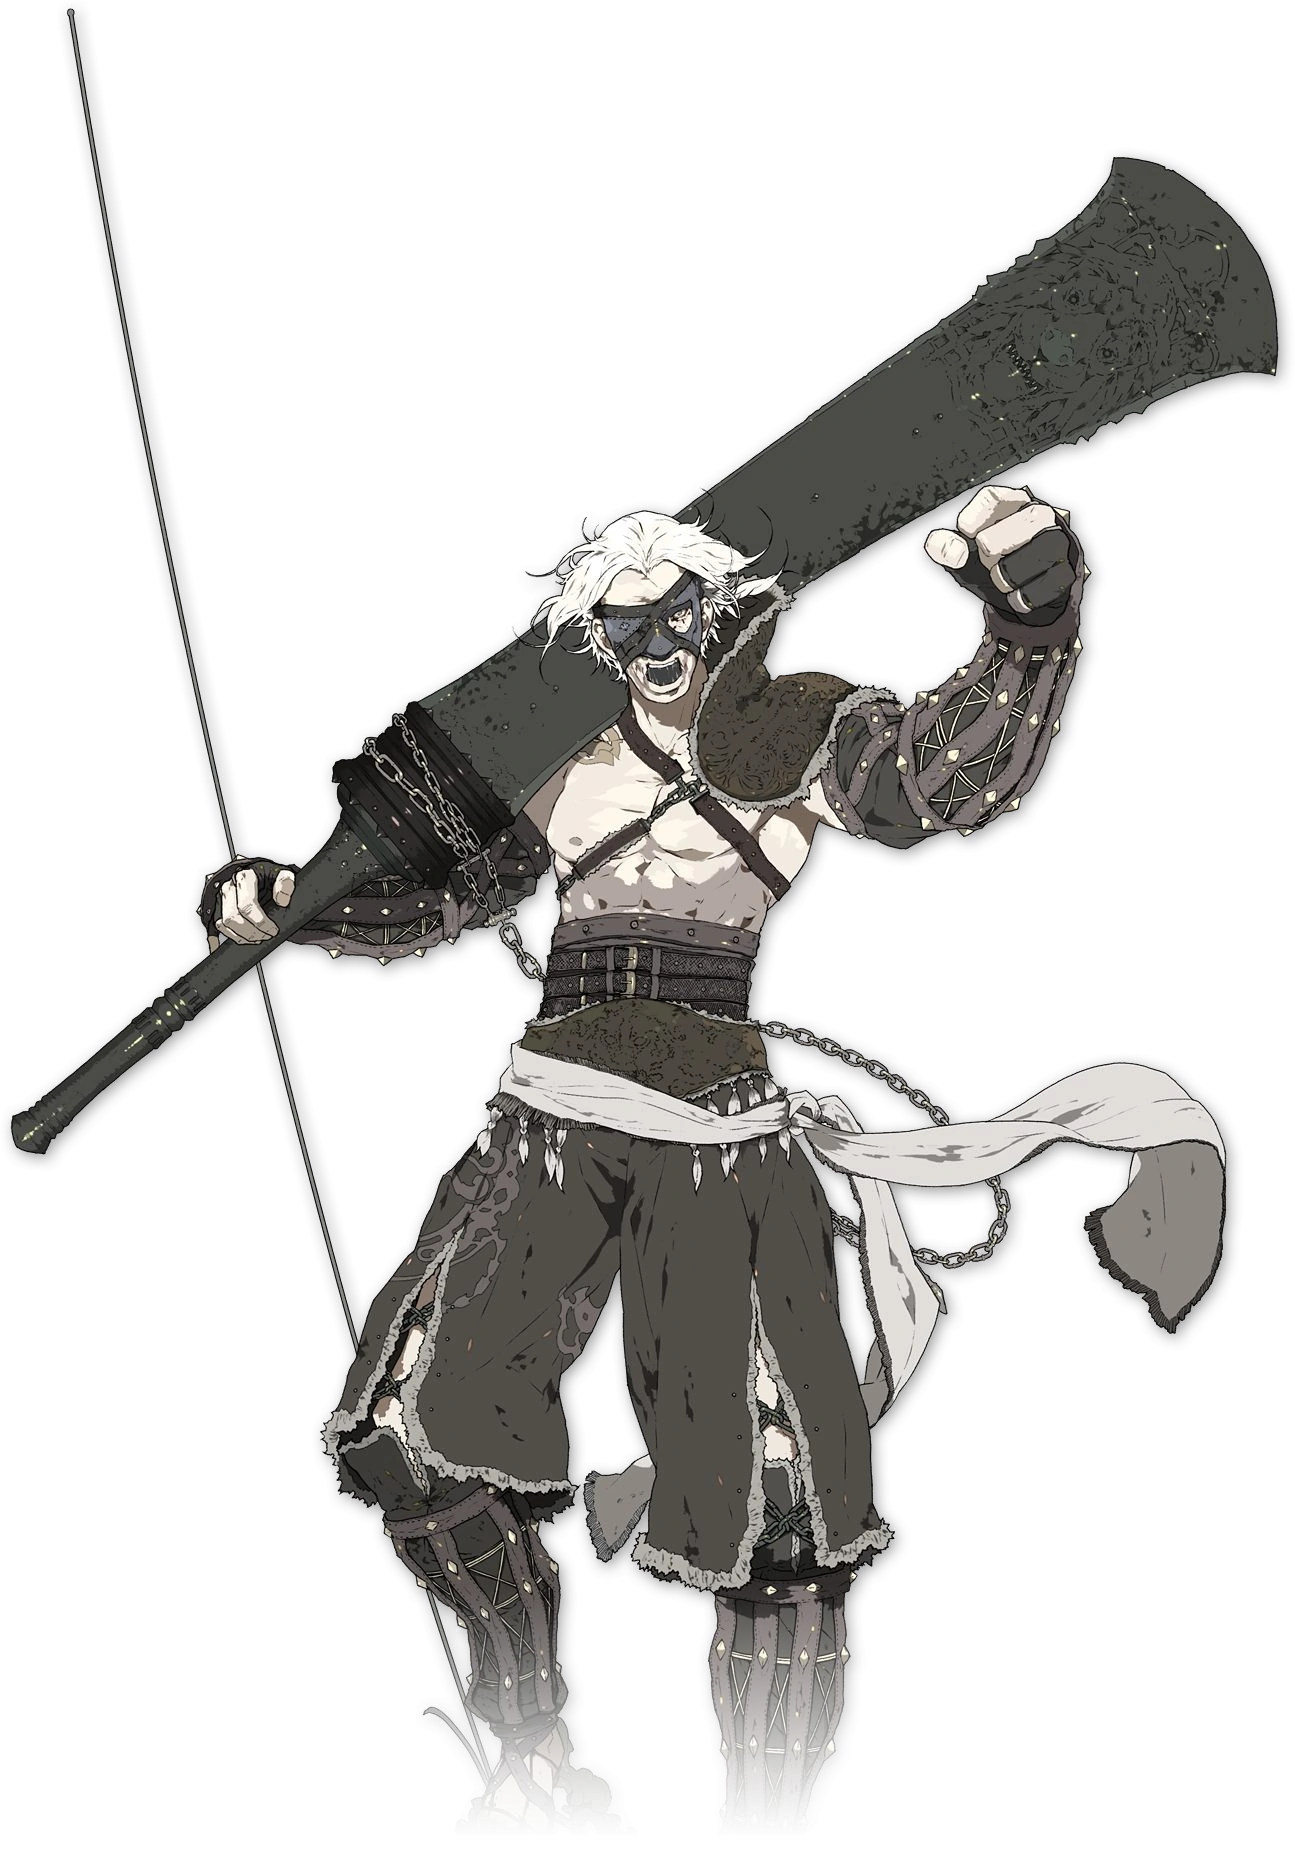 Father Nier as he appears in the first half of the game. His chest is bare except for a large cloth shoulder pad, and he holds an enormous sword.